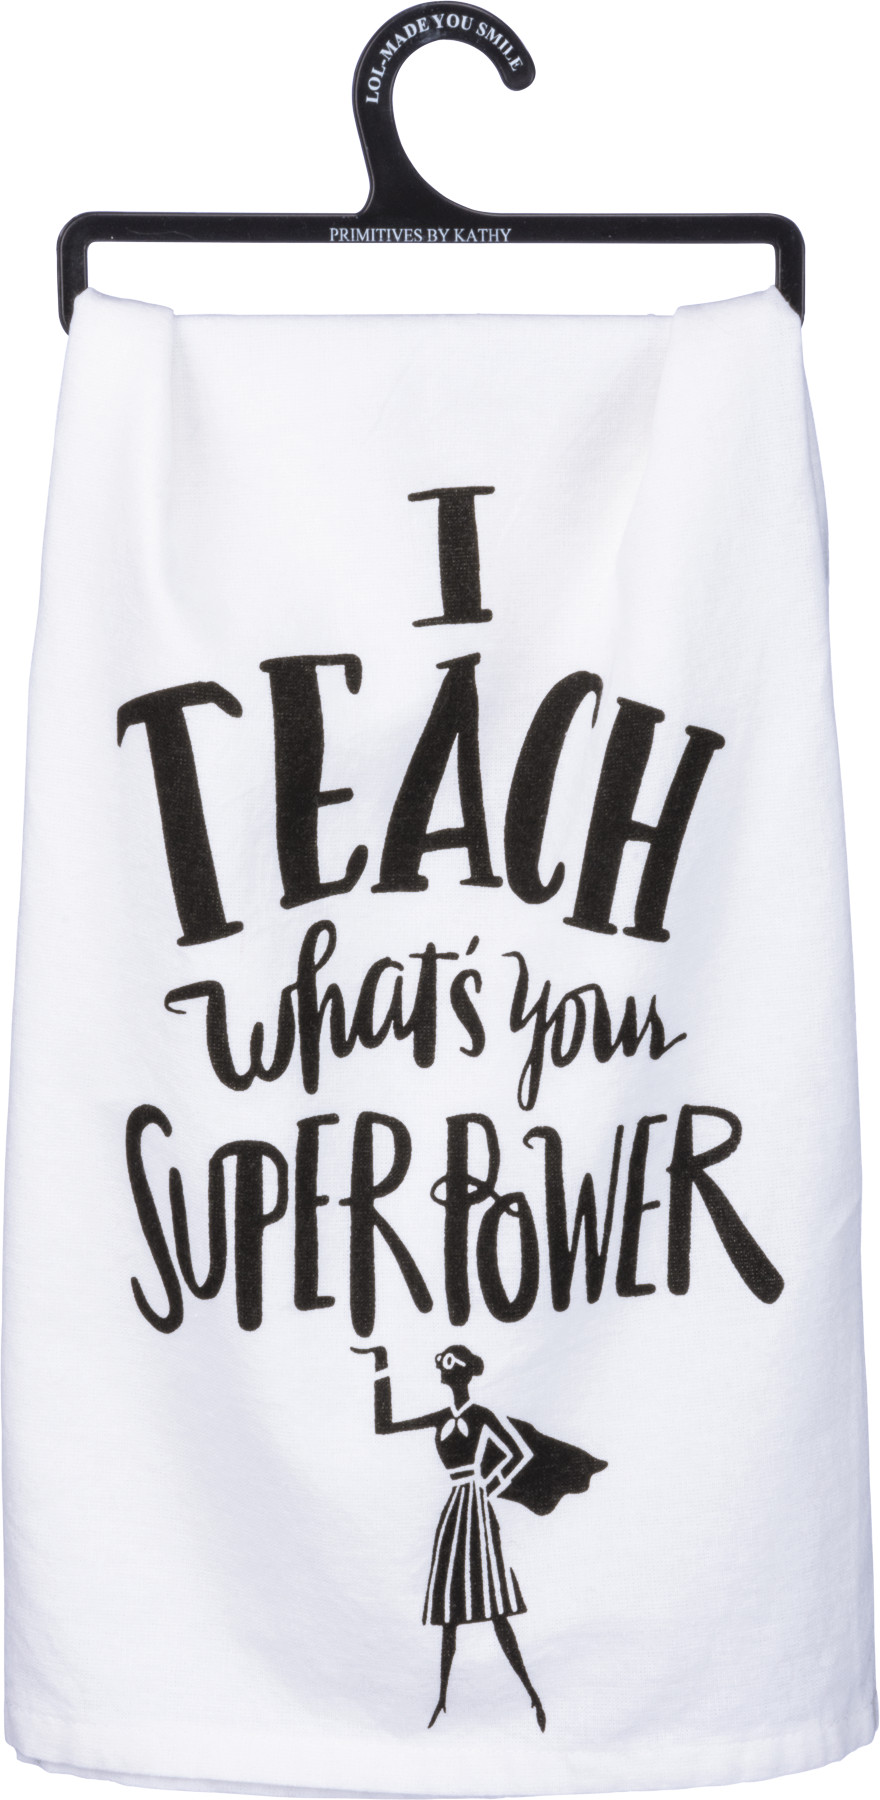 Im Nana Whats Your Superpower? Primitives by Kathy Kitchen Towel